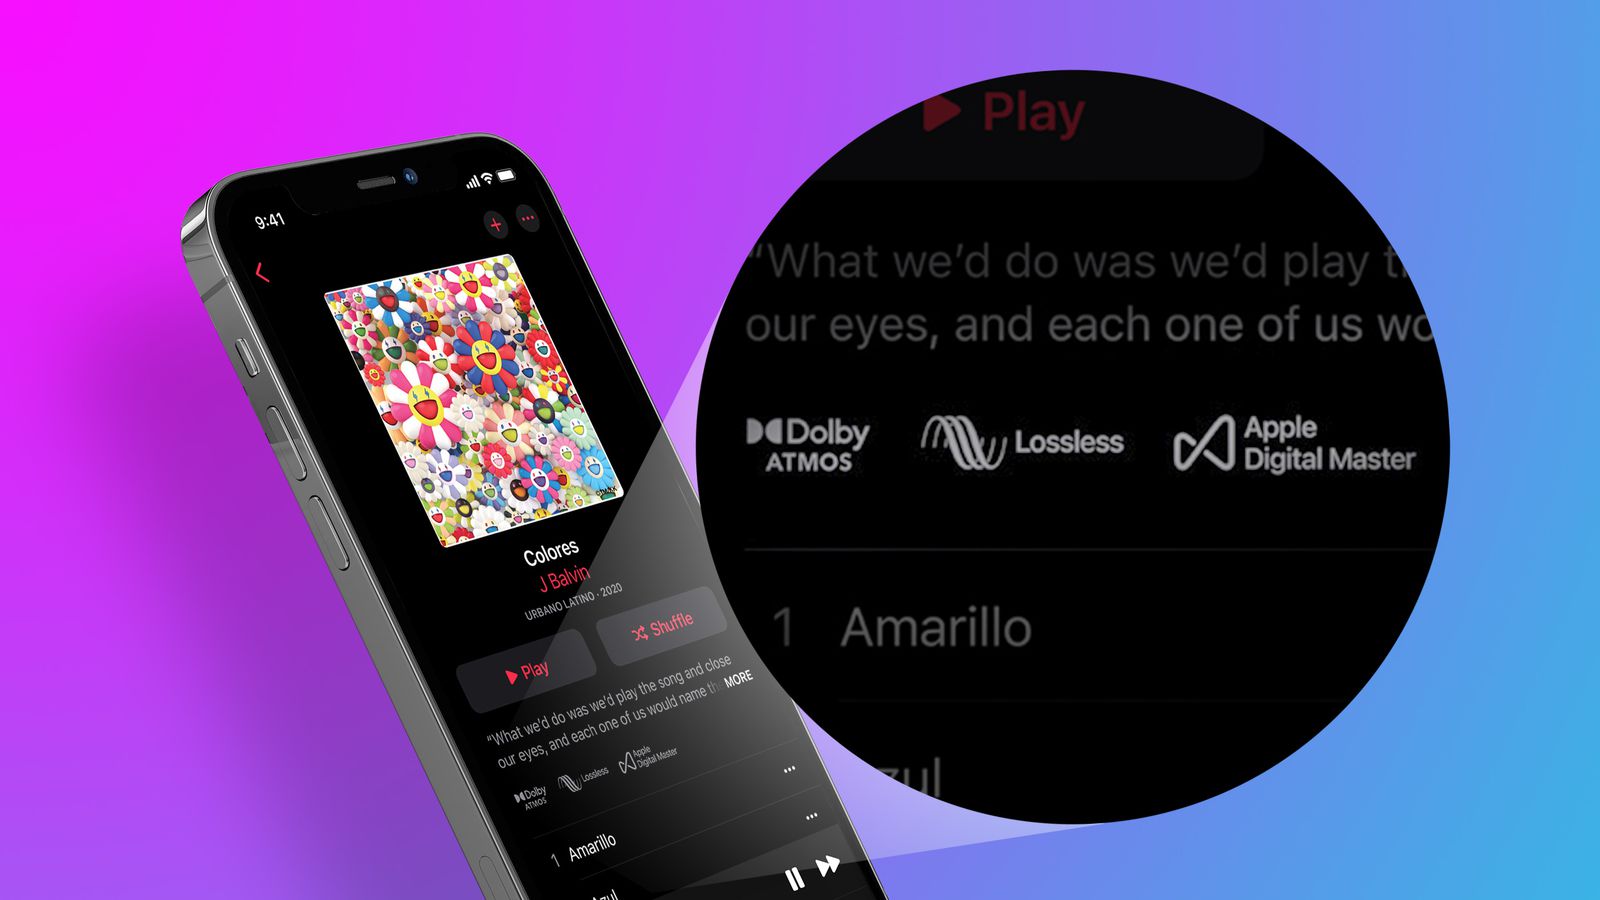 Apple Spatial Audio With Dolby Atmos Support Released